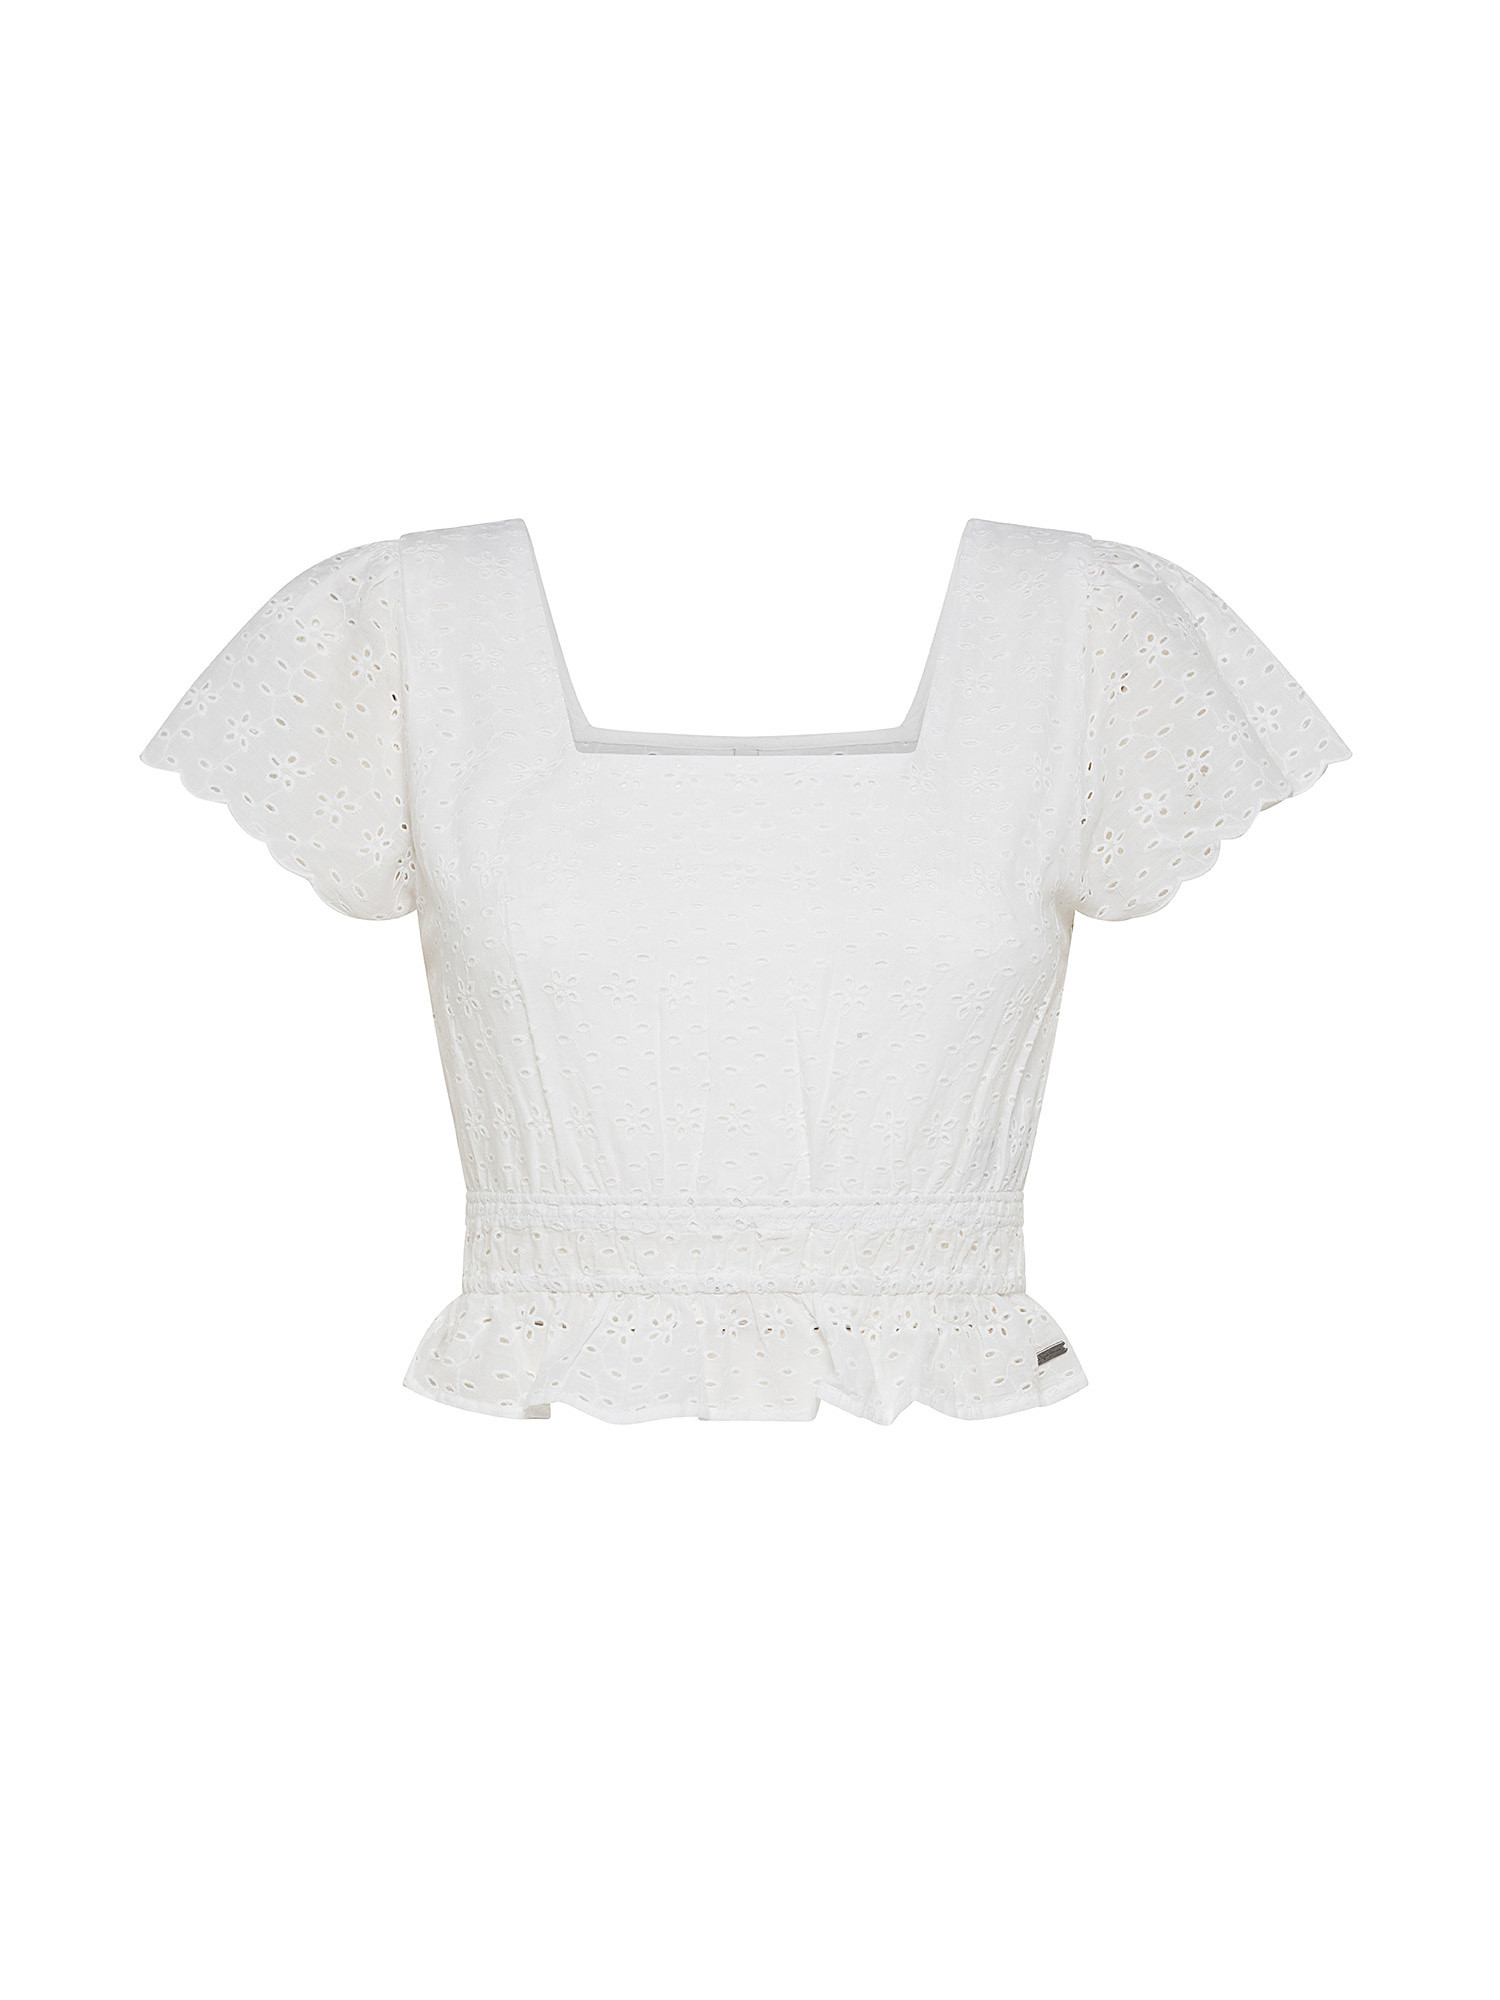 Pepe Jeans - Top in pizzo sangallo in cotone, Bianco, large image number 0